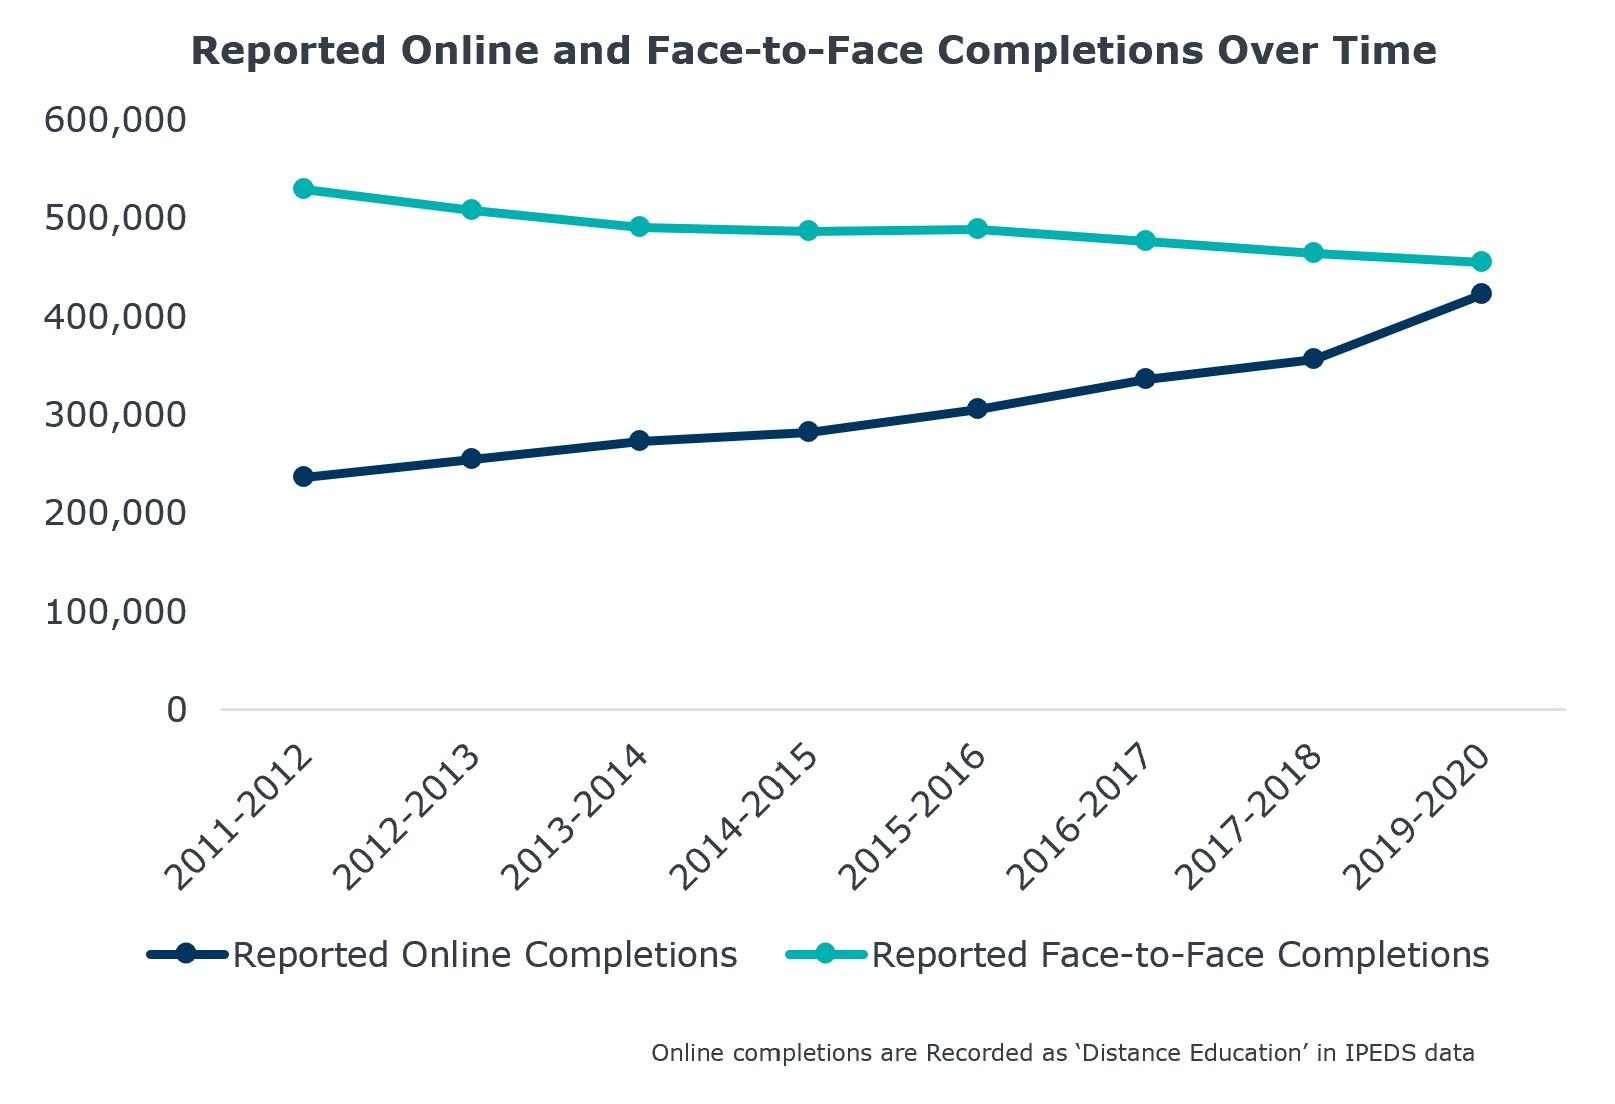 Reported online and face-to-face completions over time